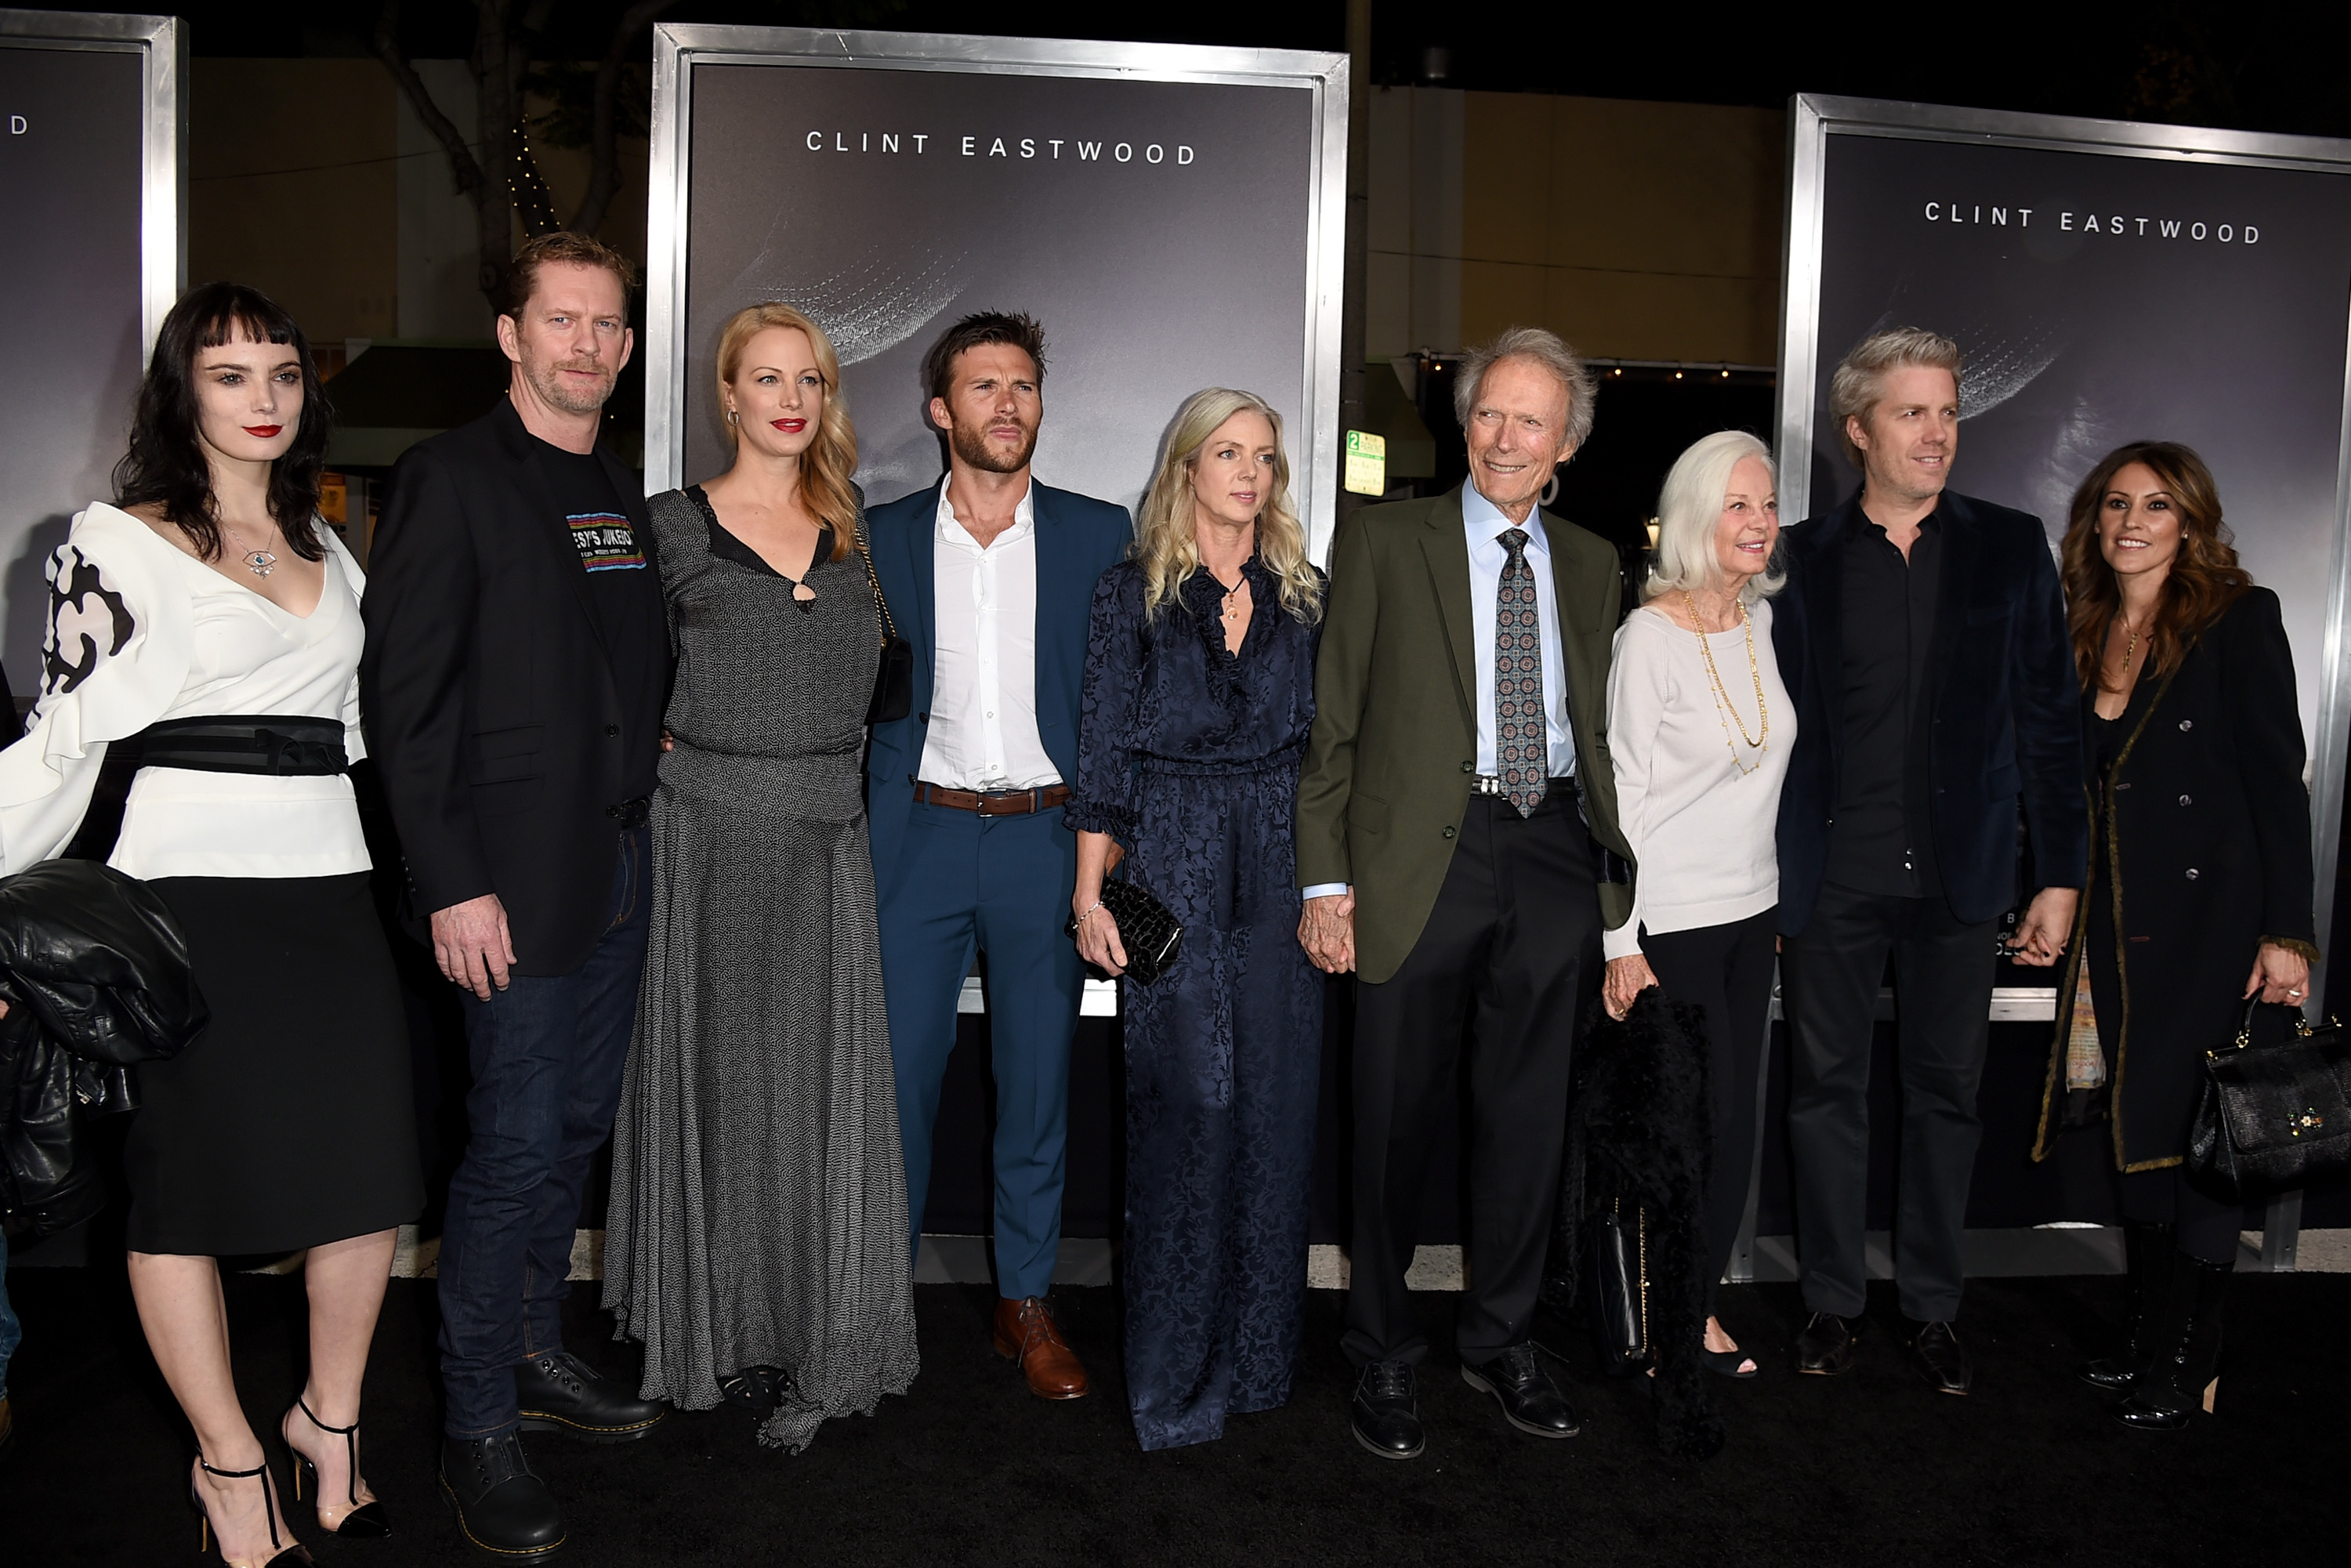 Graylen Eastwood, Stacy Poitras, Alison Eastwood, Scott Eastwood, Christina Sandera, Clint Eastwood, Maggie Johnson, Kyle Eastwood, and Cynthia Ramirez at the premiere of "The Mule" in Los Angeles, California on December 10, 2018 | Source: Getty Images